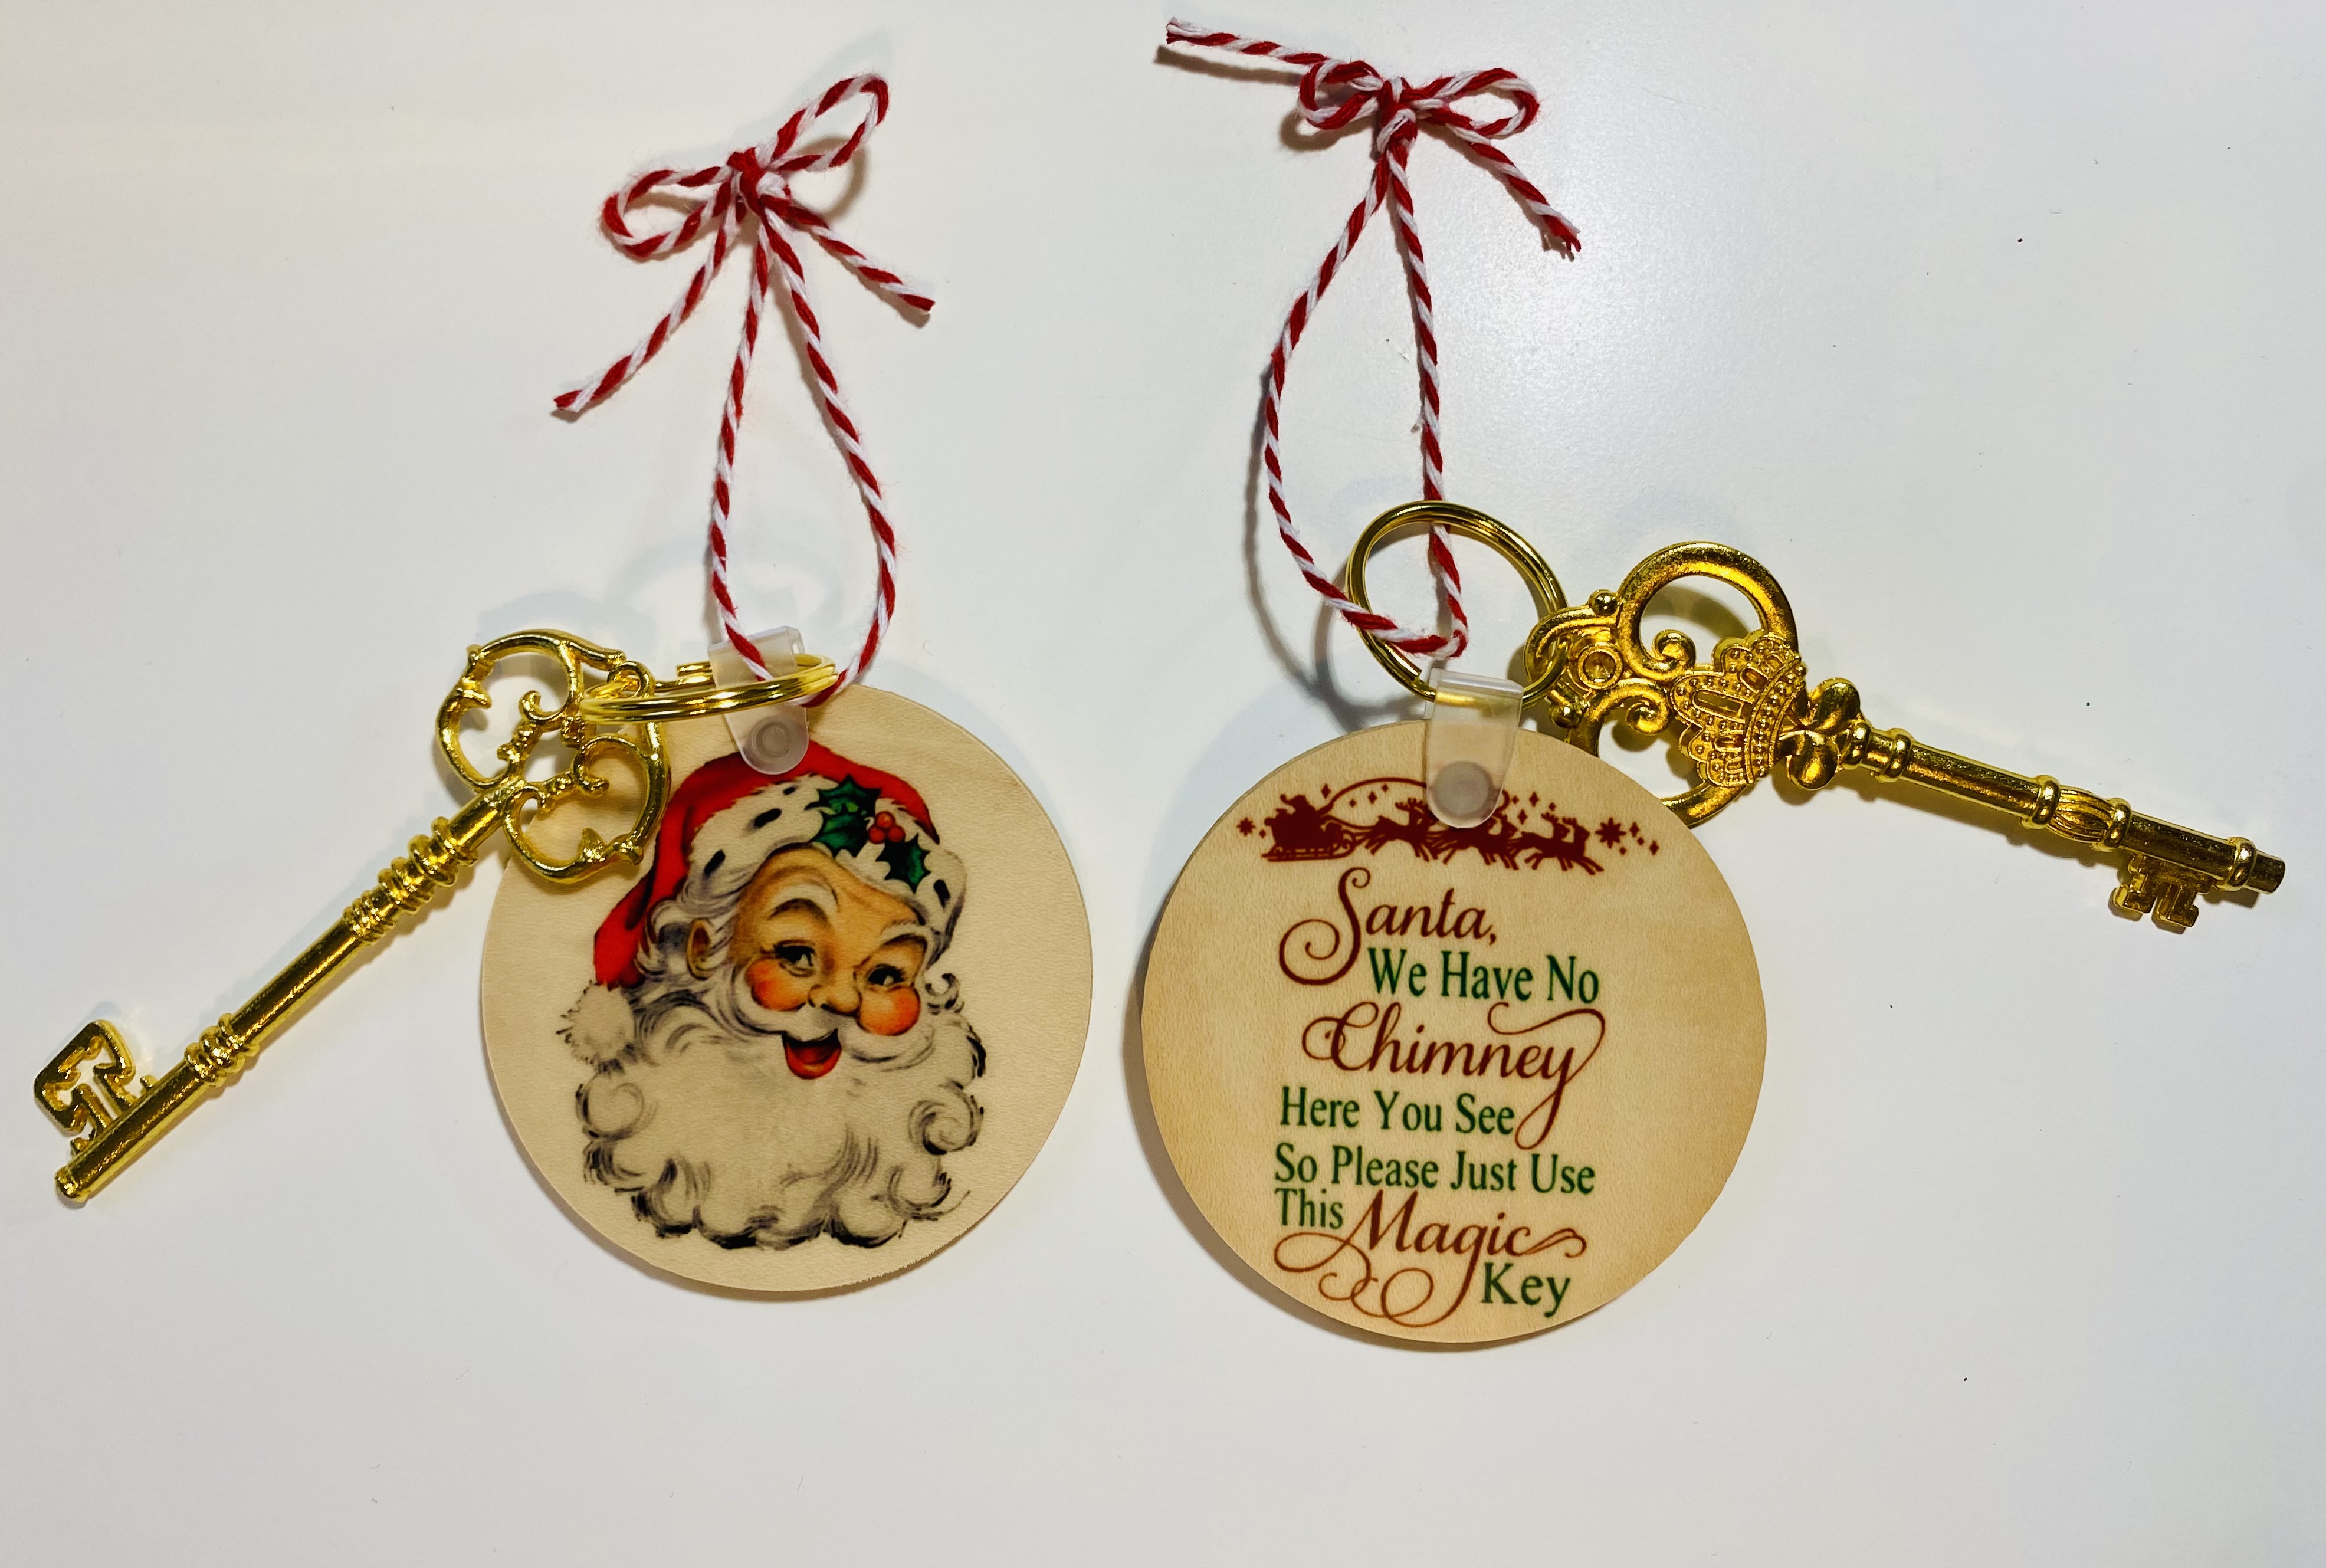 Santaâ€™s Magic Key to hang on front door or Christmas tree. Used the Unisub 2.5â€ natural woo